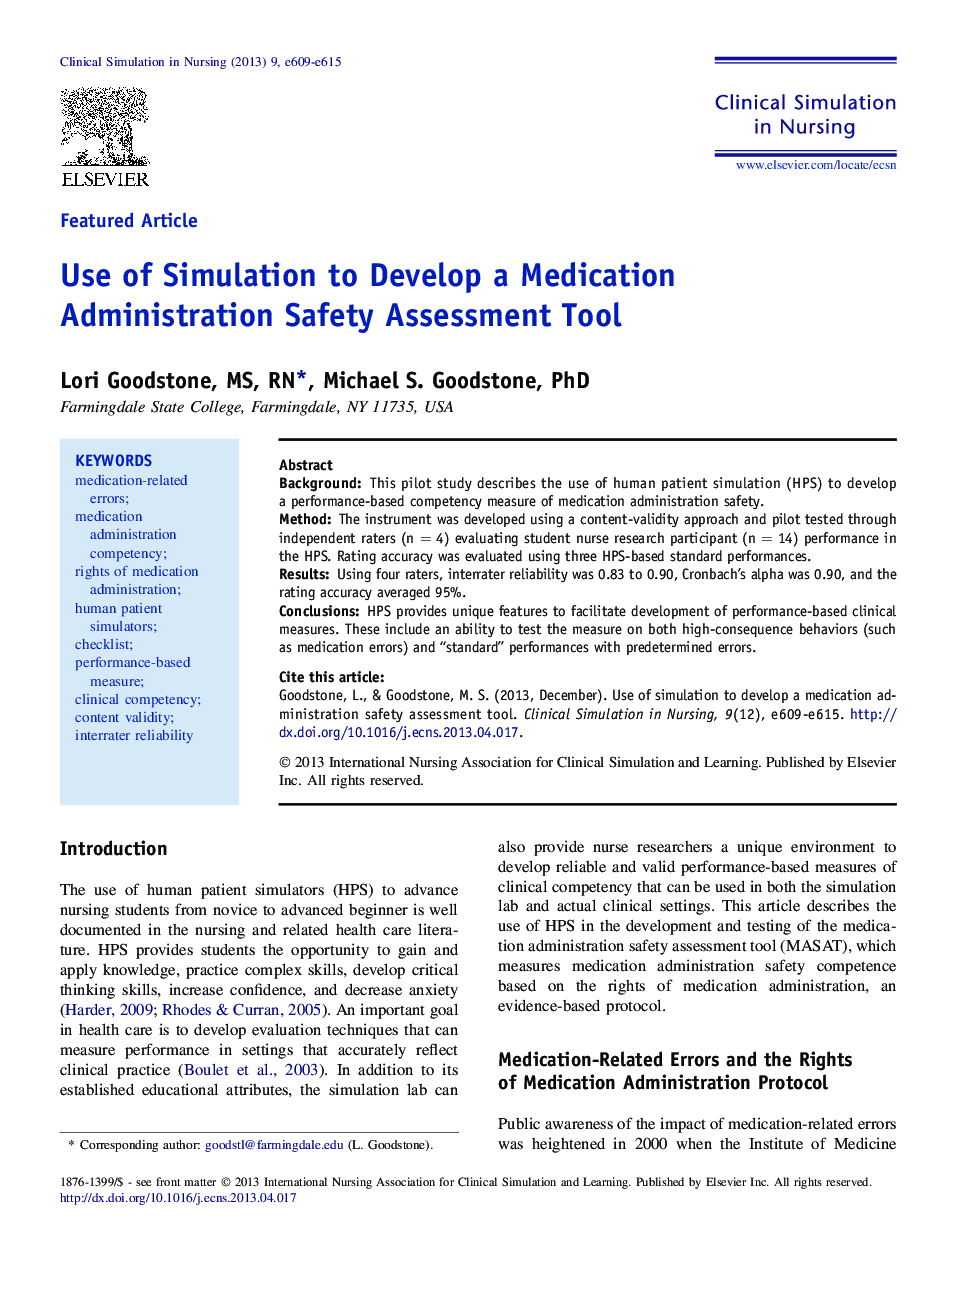 Featured ArticleUse of Simulation to Develop a Medication Administration Safety Assessment Tool